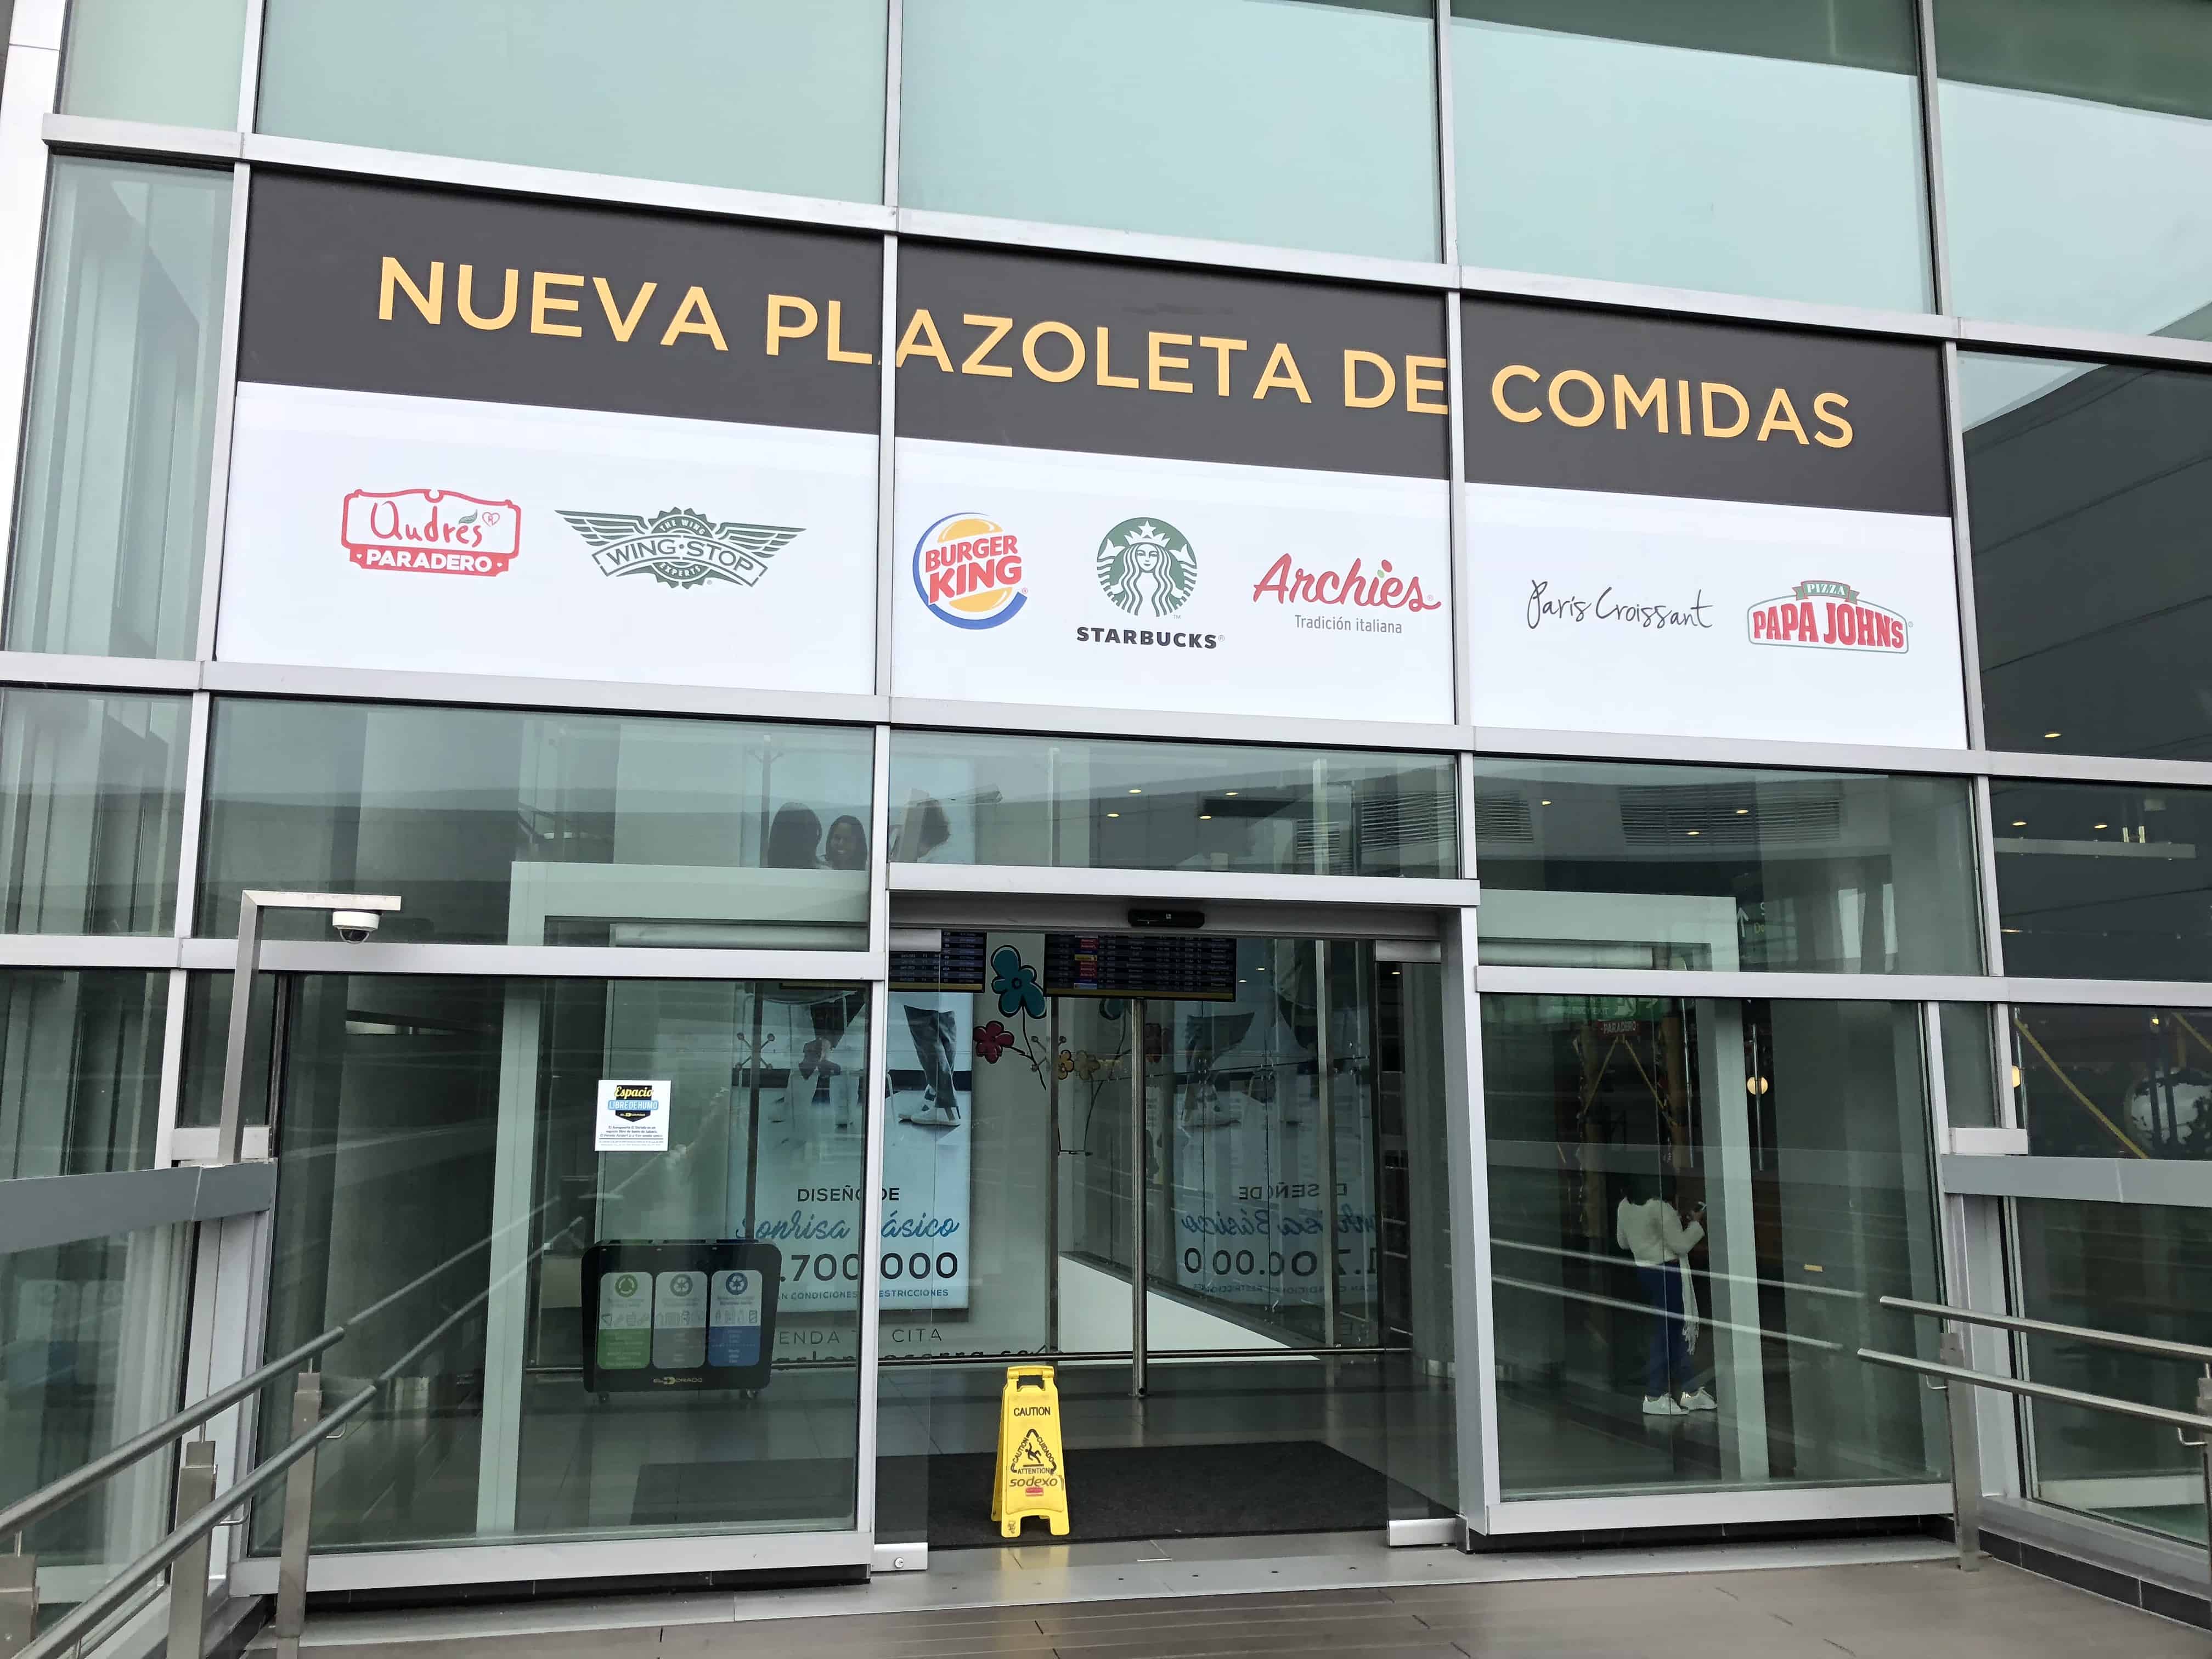 Entrance to the food court at El Dorado International Airport in Bogotá, Colombia